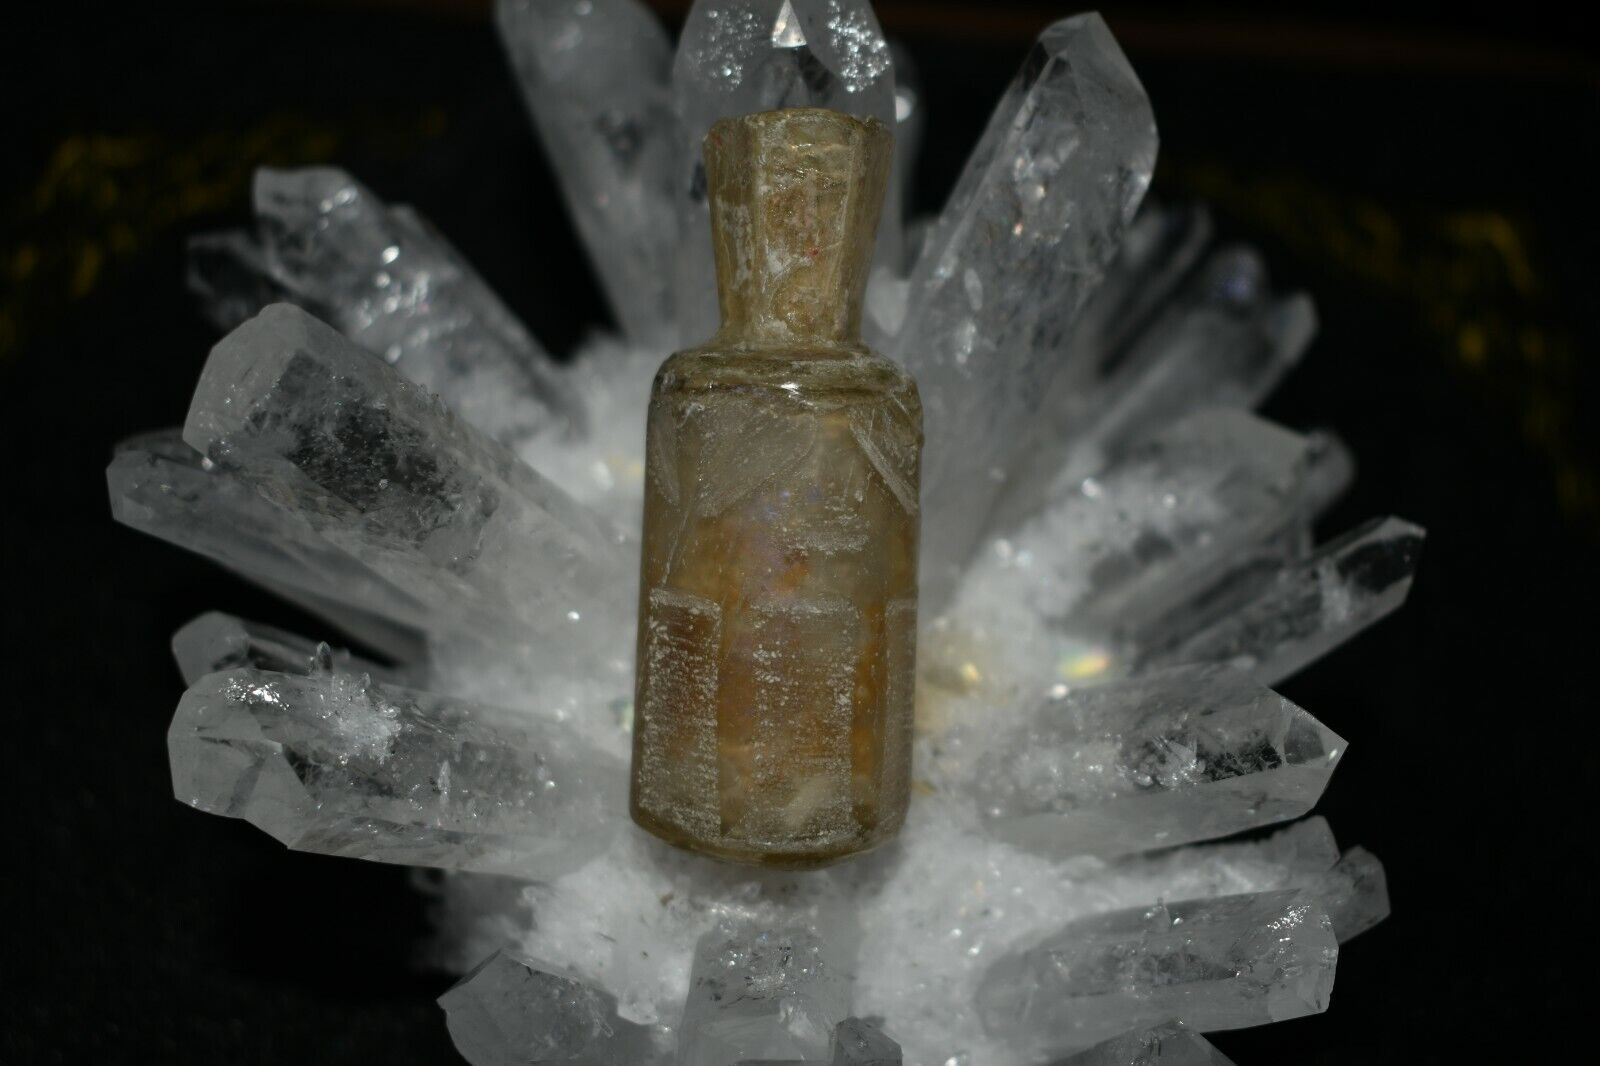 Genuine Ancient Sasanian Glass Bottle with Wonder Yellow Color from Central Asia